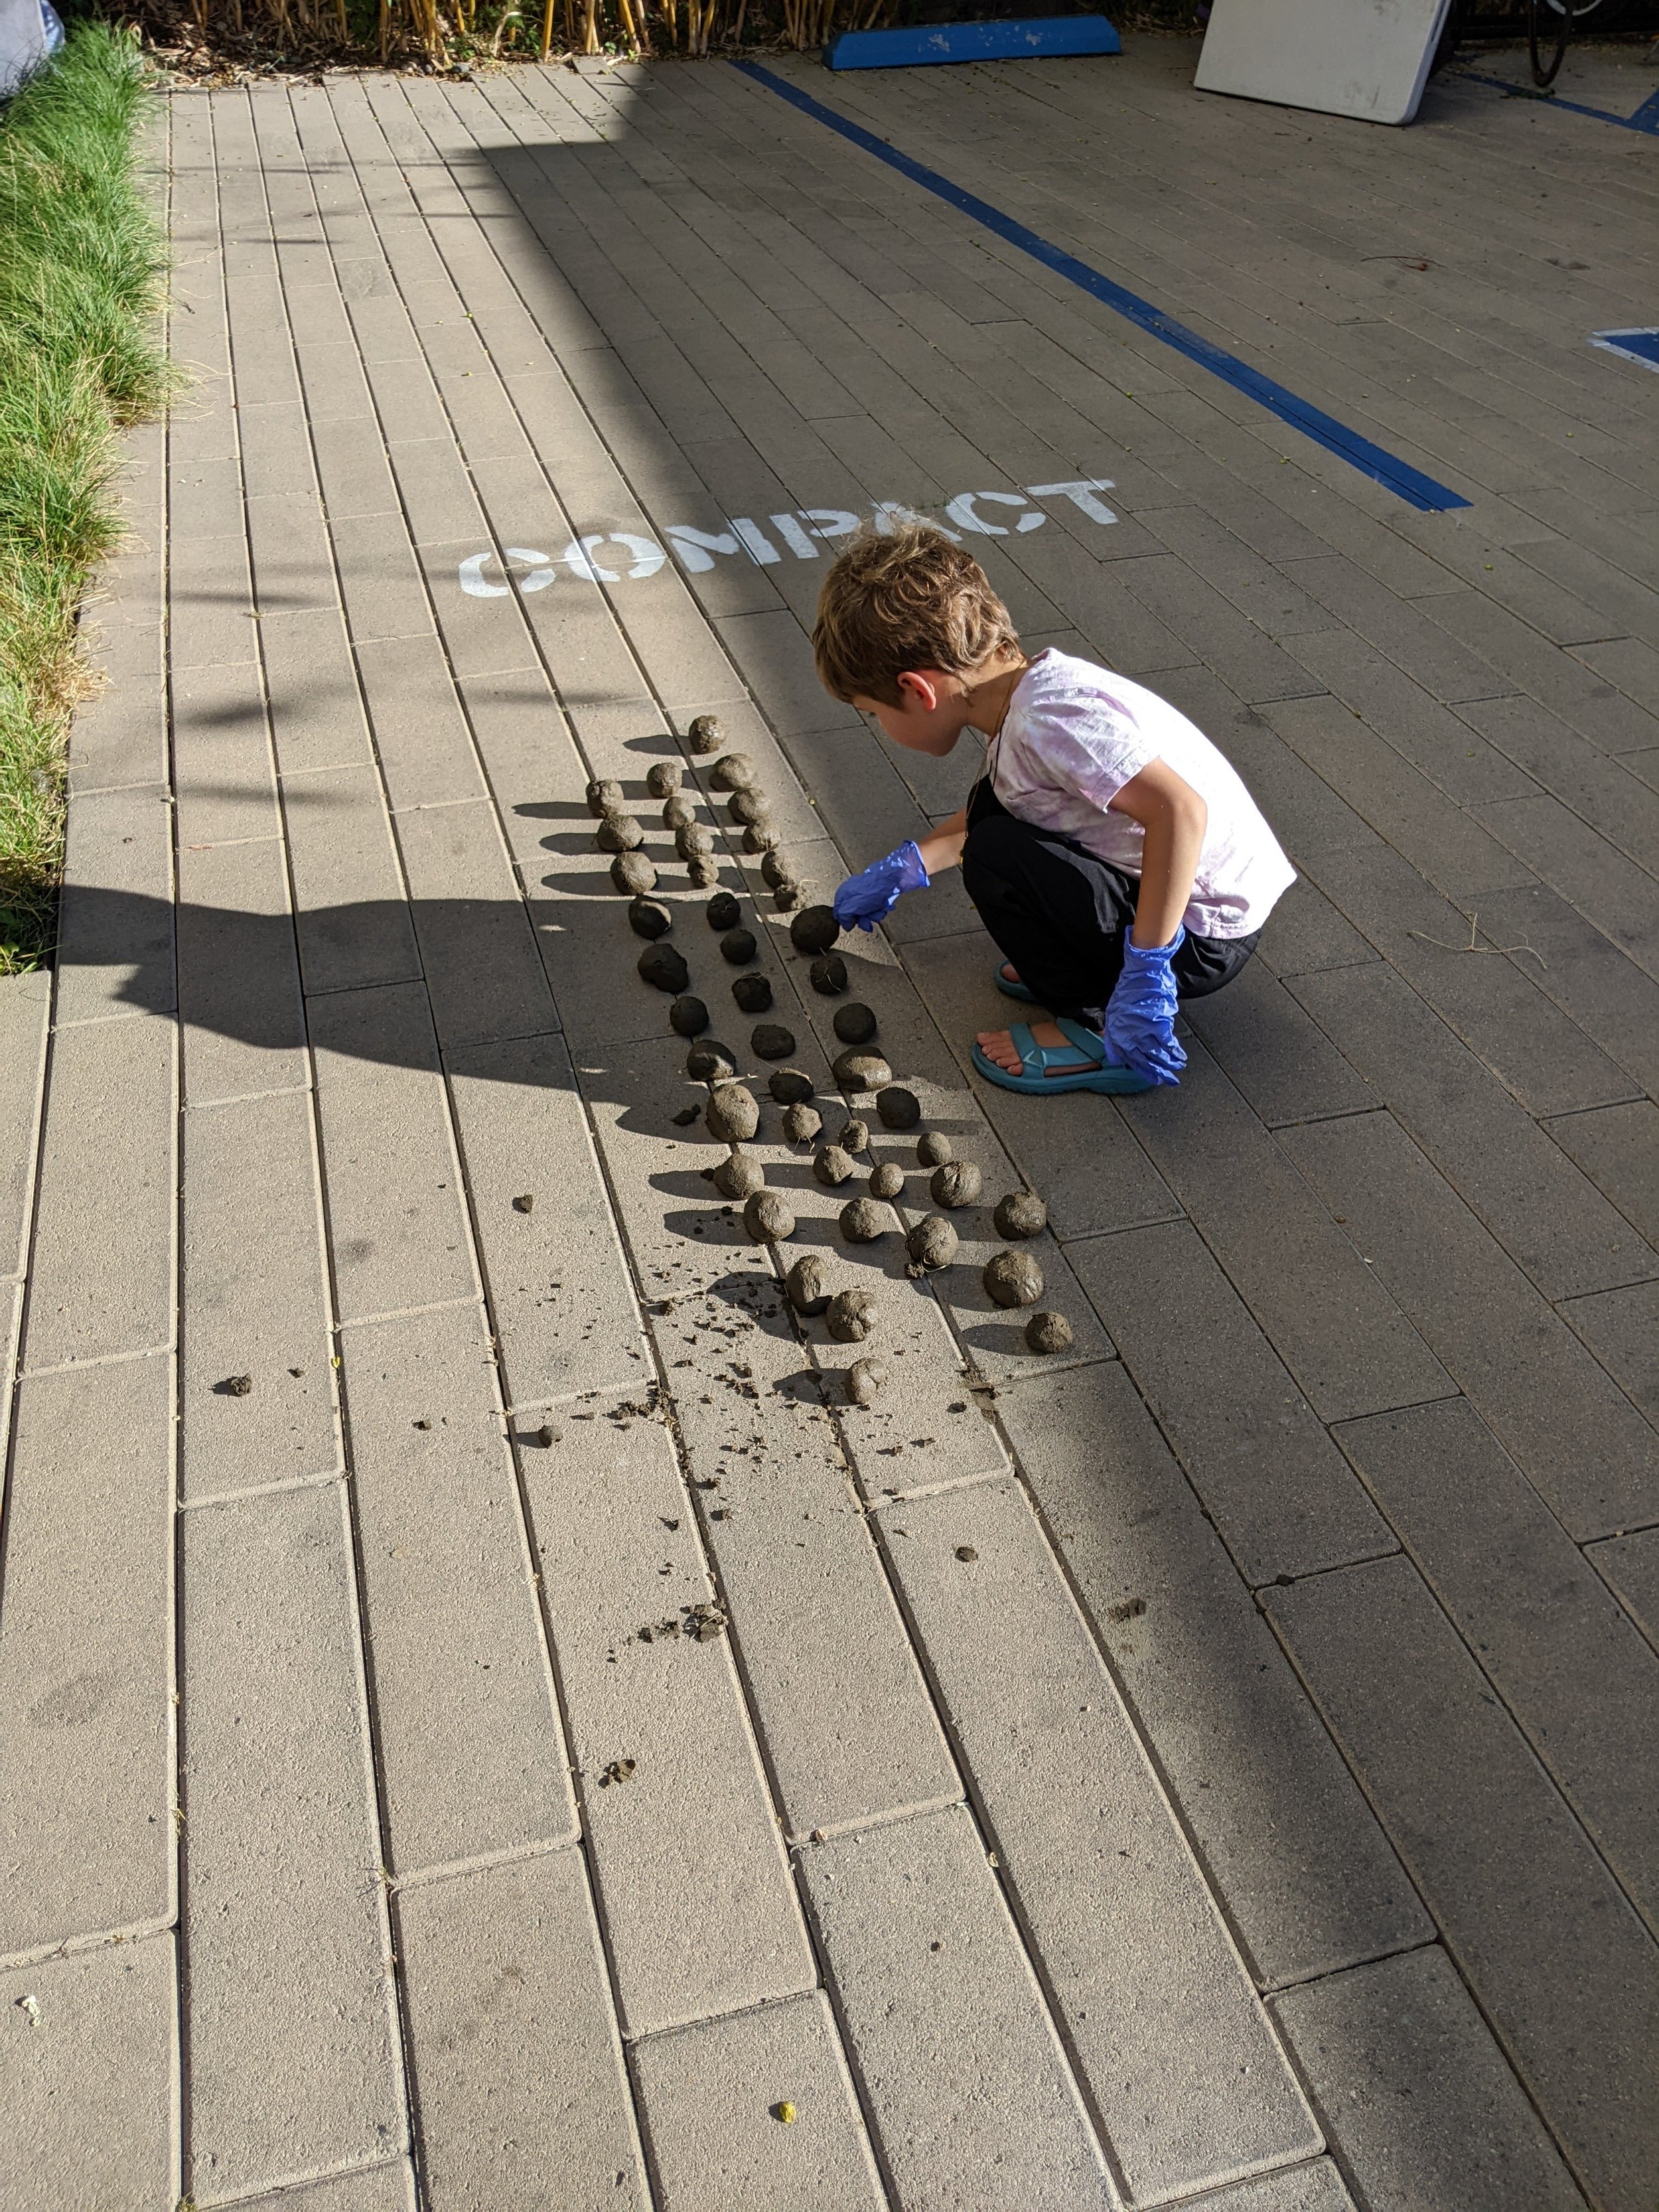 A compact participant arranges seed bombs. /Photo: Jenna Didier